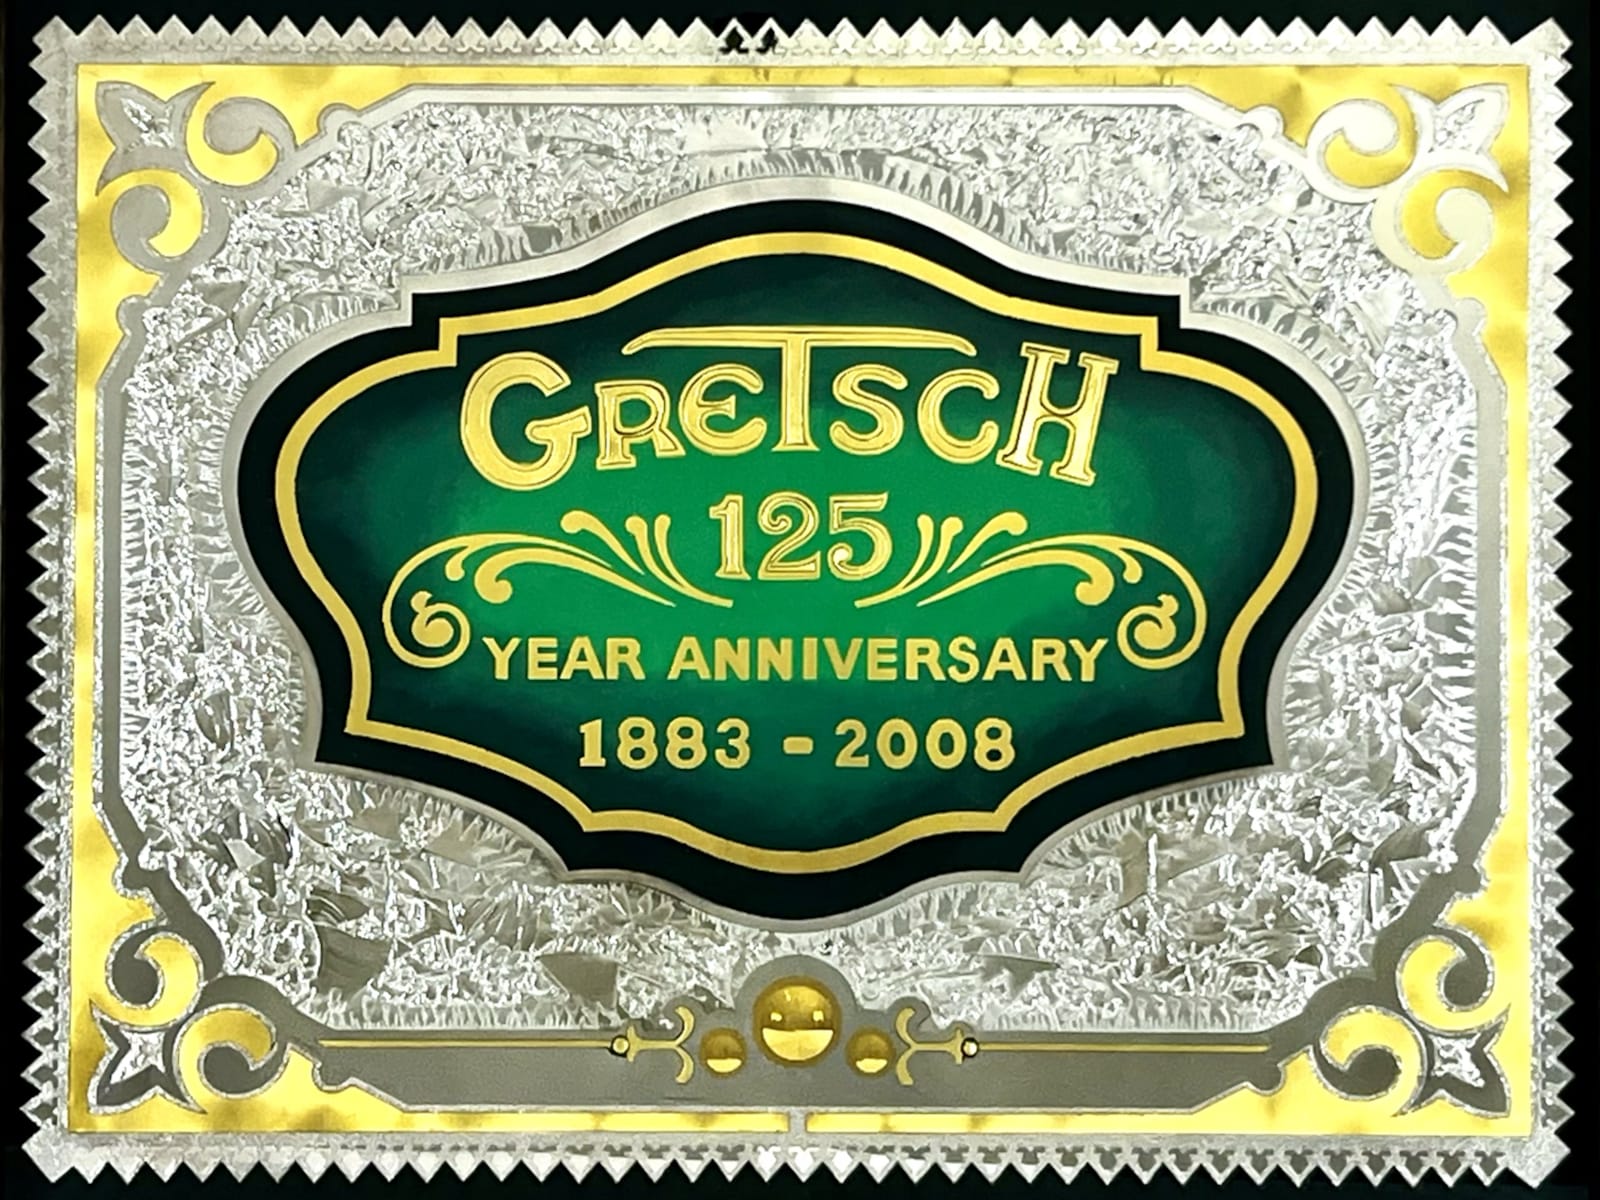 Decorative glass panel with gold, silver and green paint. It reads "Gretsch 125 year anniversary, 1883–2008".